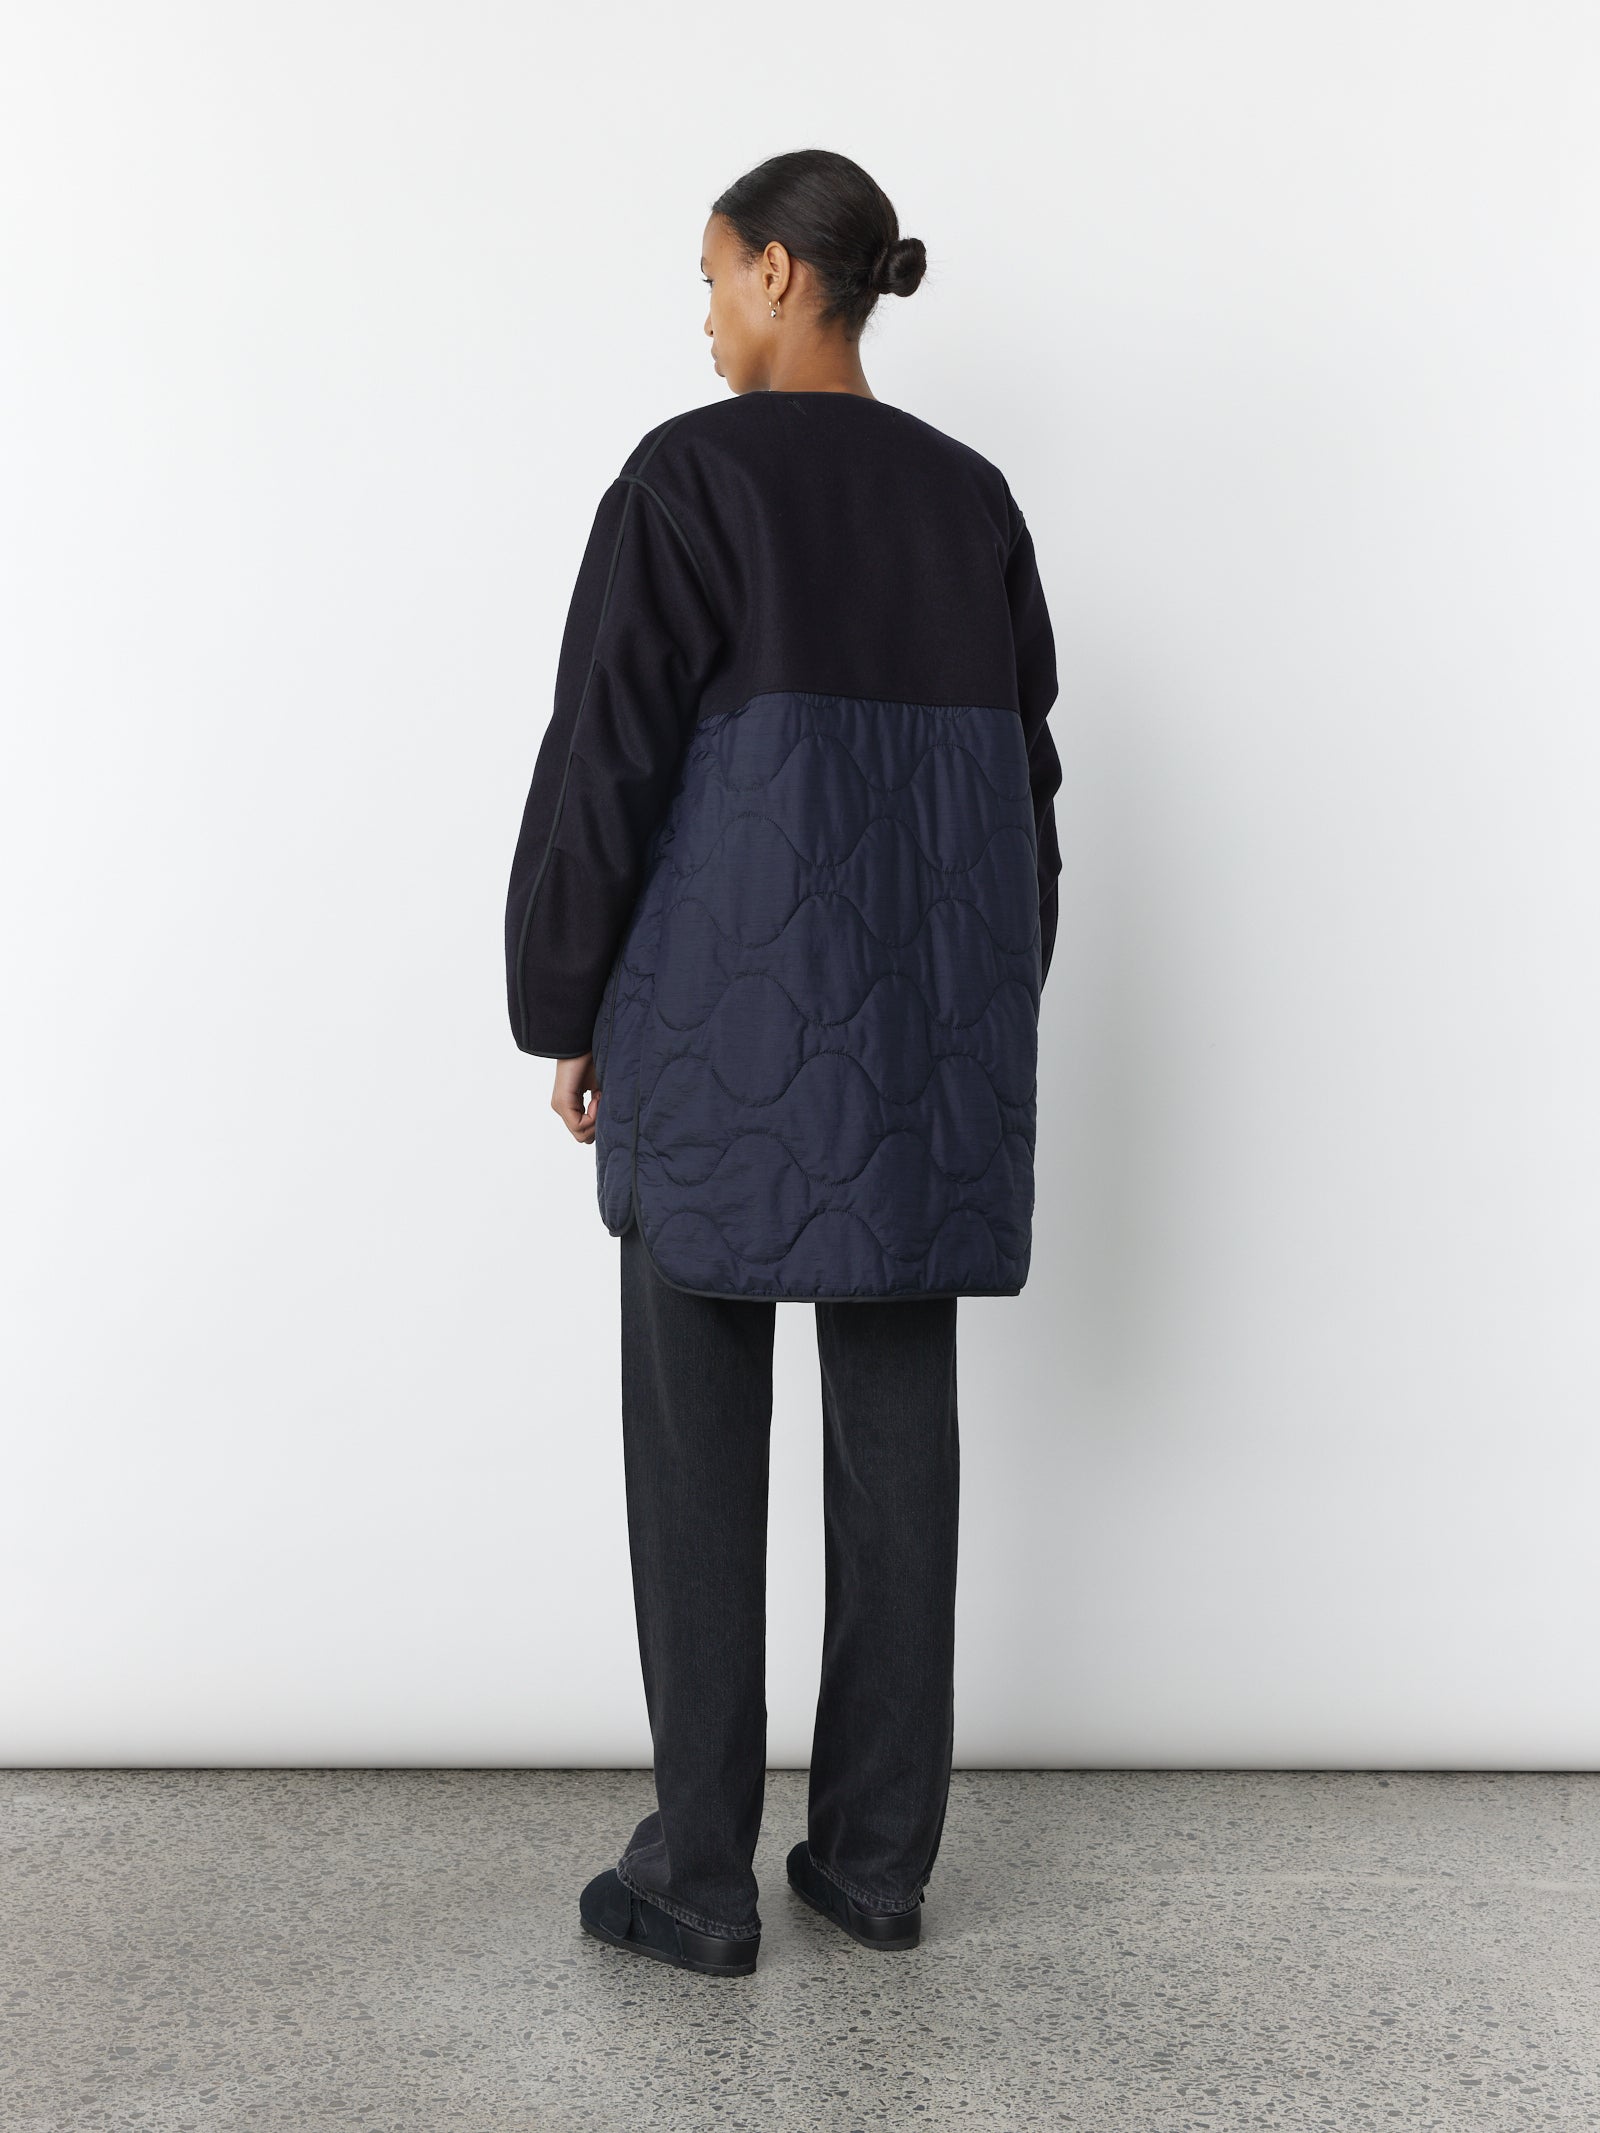 Signature Quilted Jacket in Wool Felt - Navy / Black